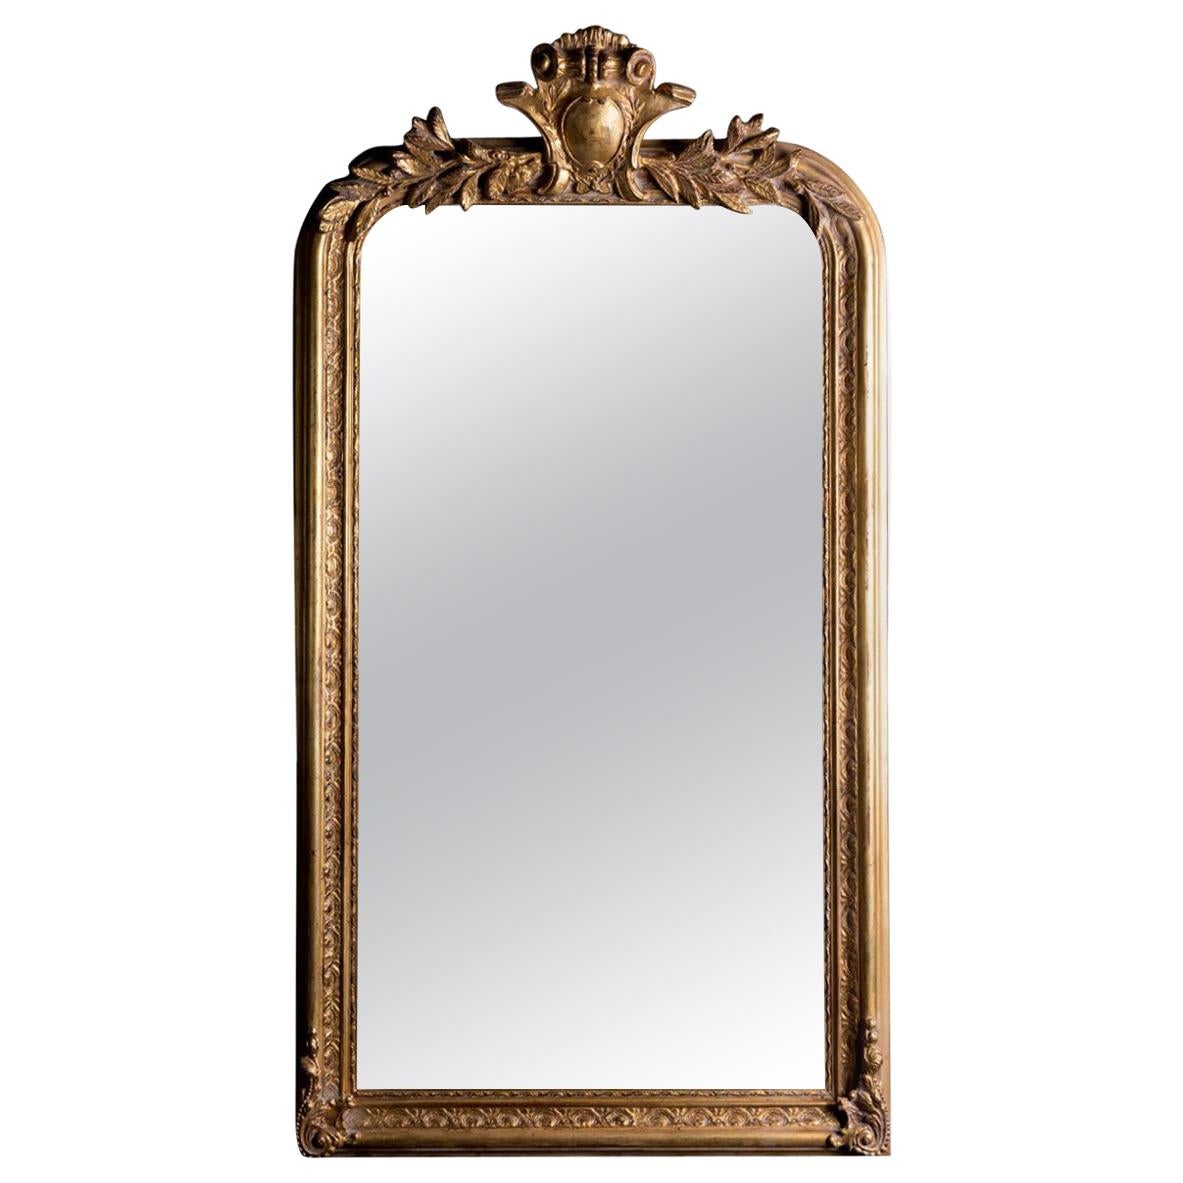 Philippe Hand Carved Beveled Mirror in Hand Gilt Frame 'Pair Available'